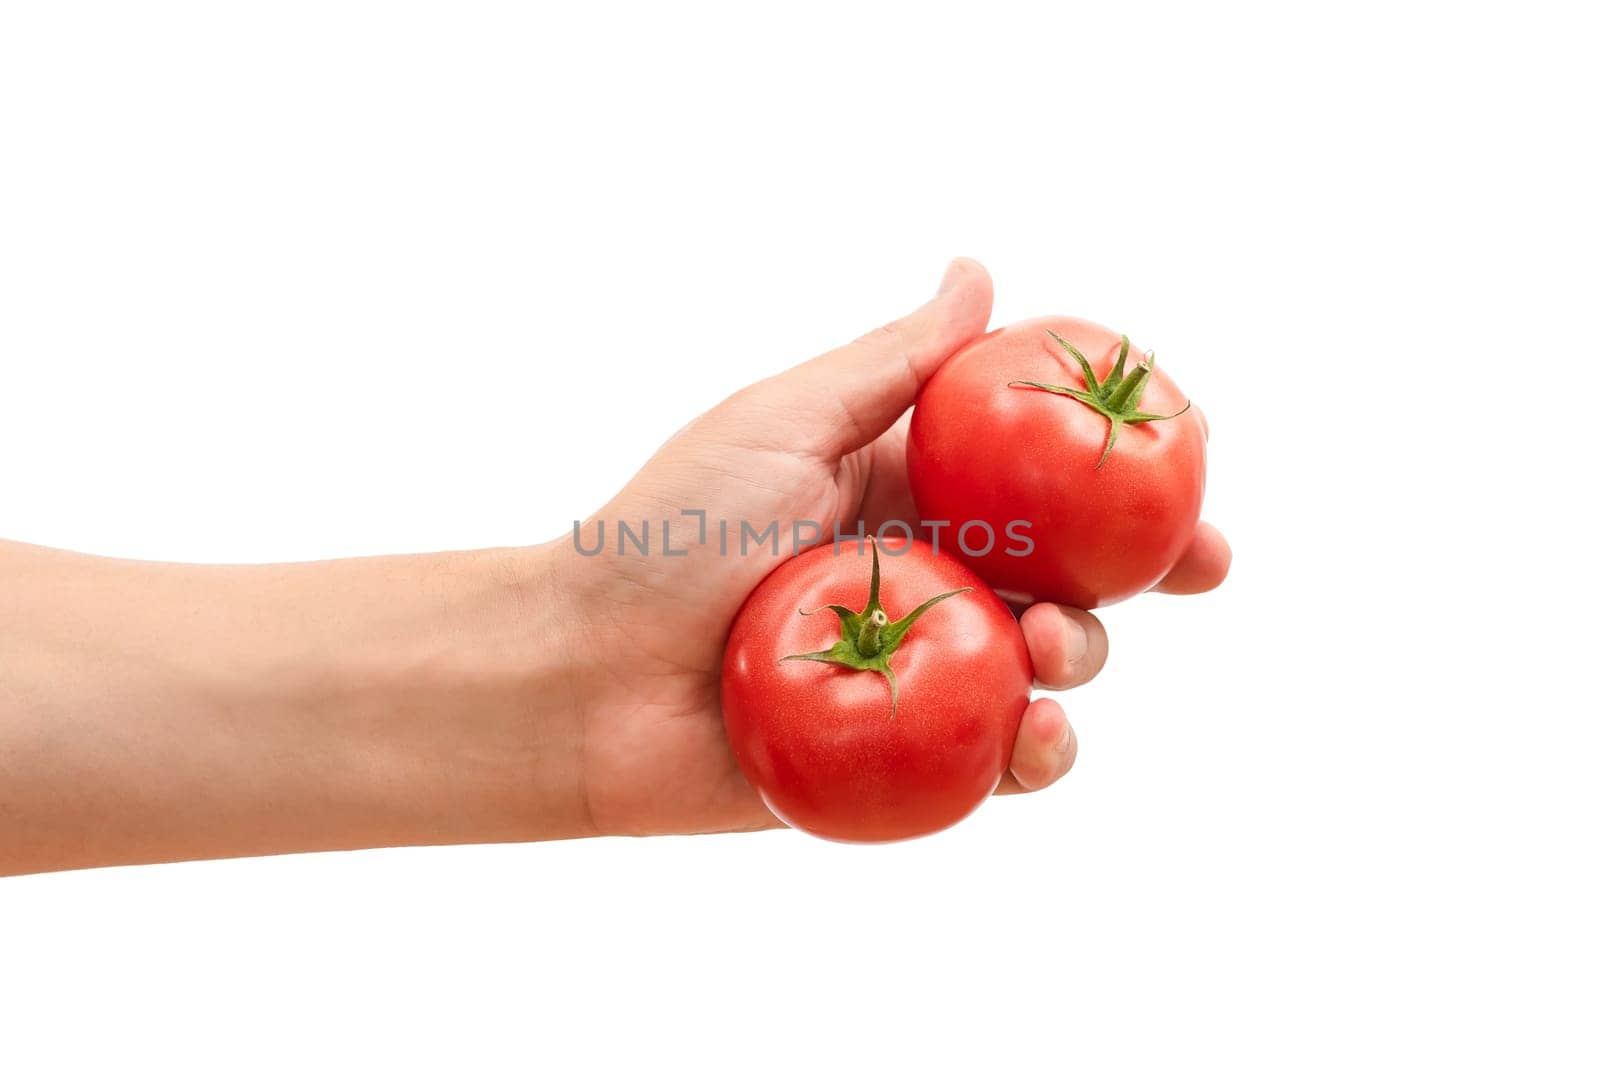 Mans hand holding red tomatoes in hand isolated on white background by Shablovskyistock